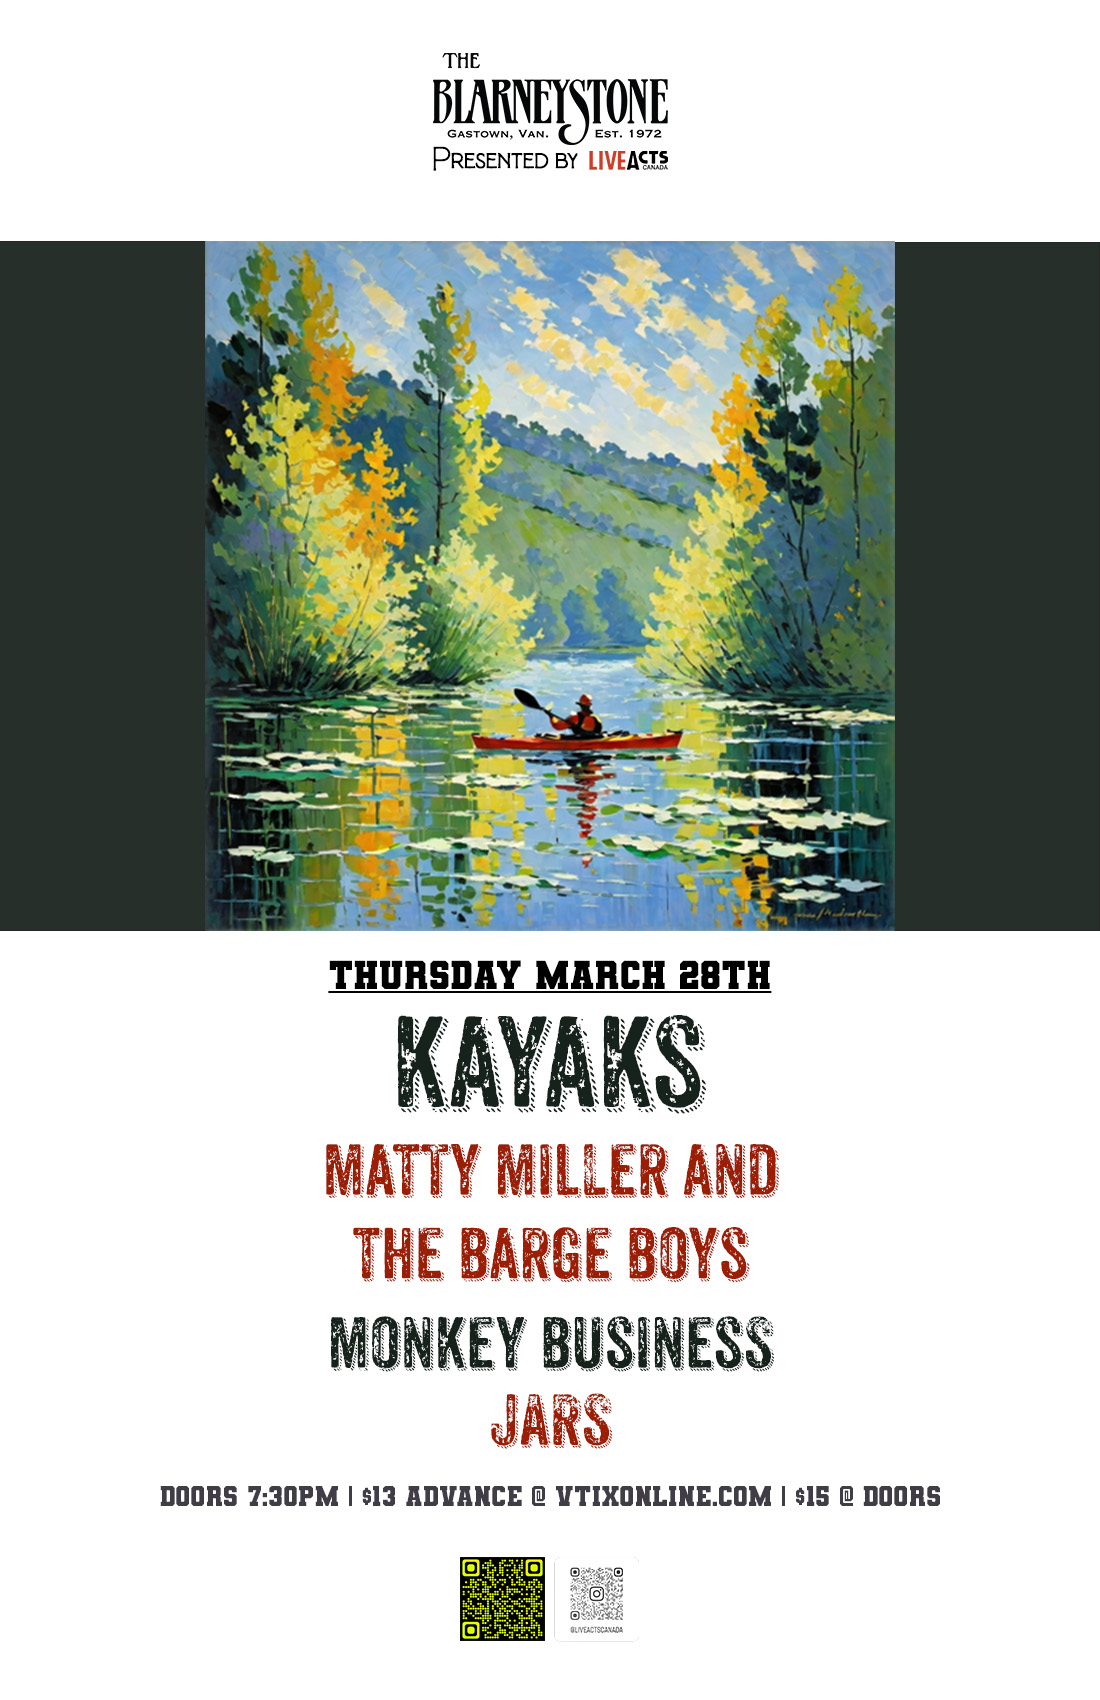 Kayaks w/ Matty Miller and the Barge Boys, Monkey Business & JARS